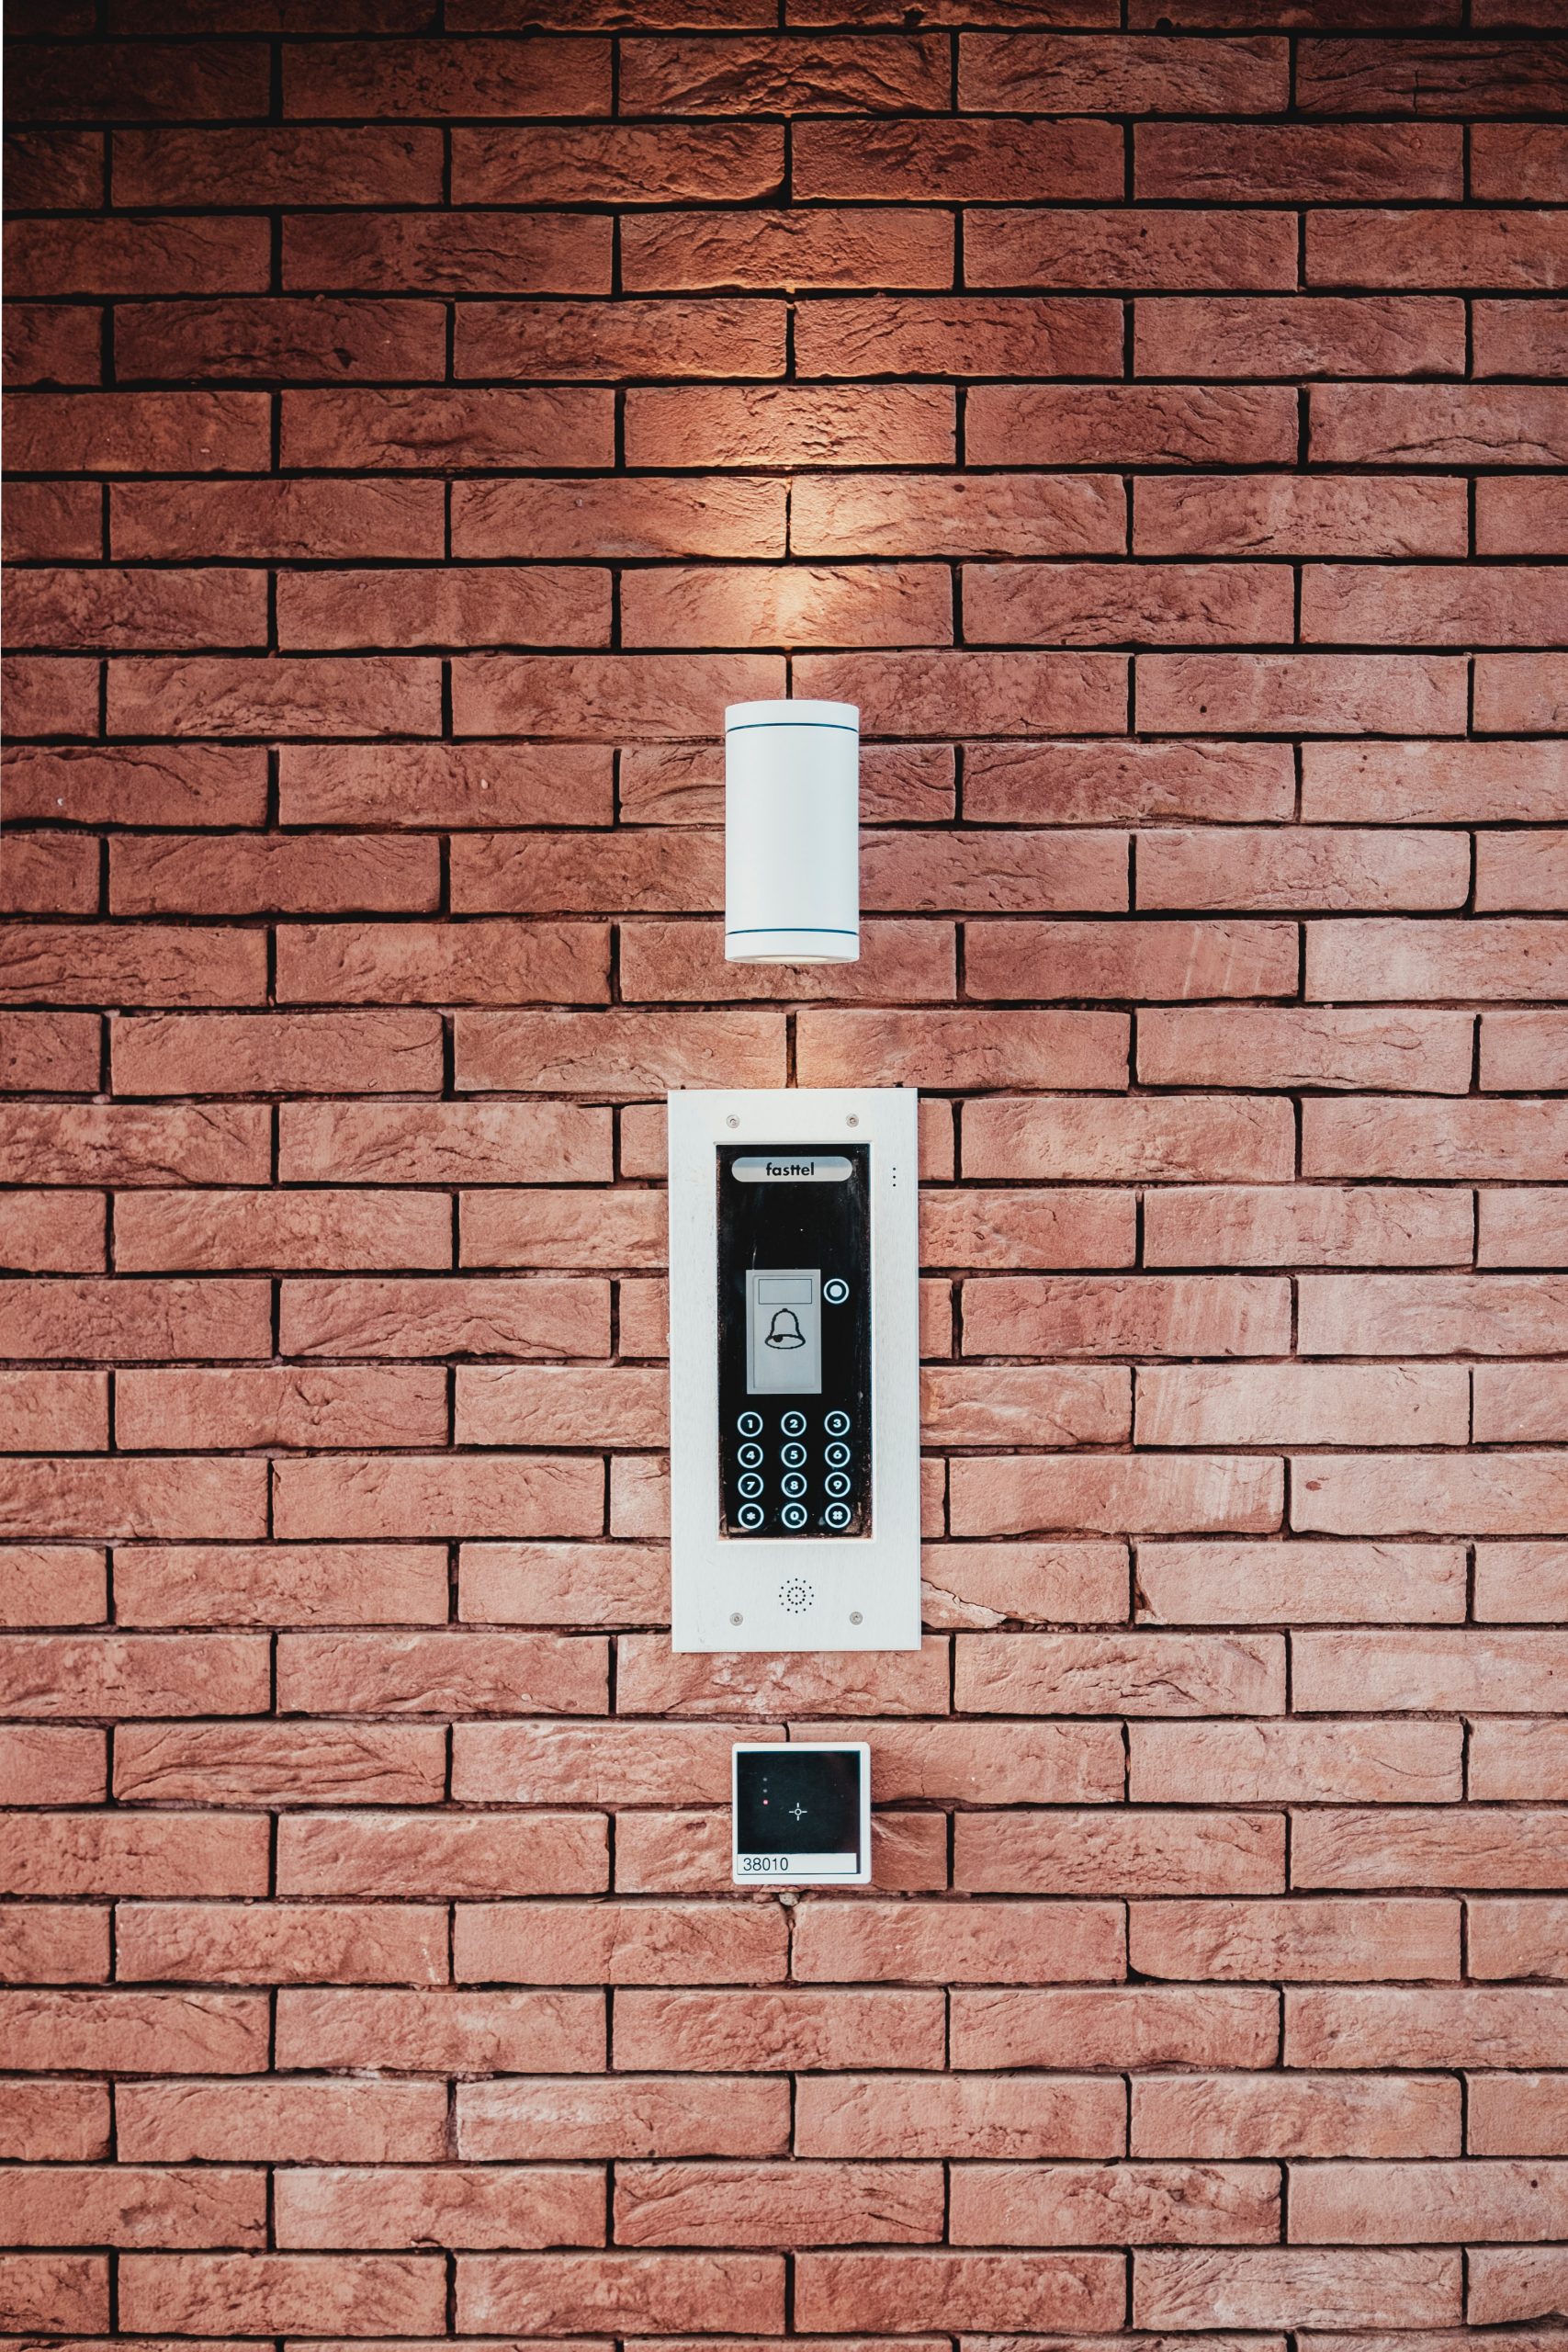 Brick wall with light and security alarm panel below it